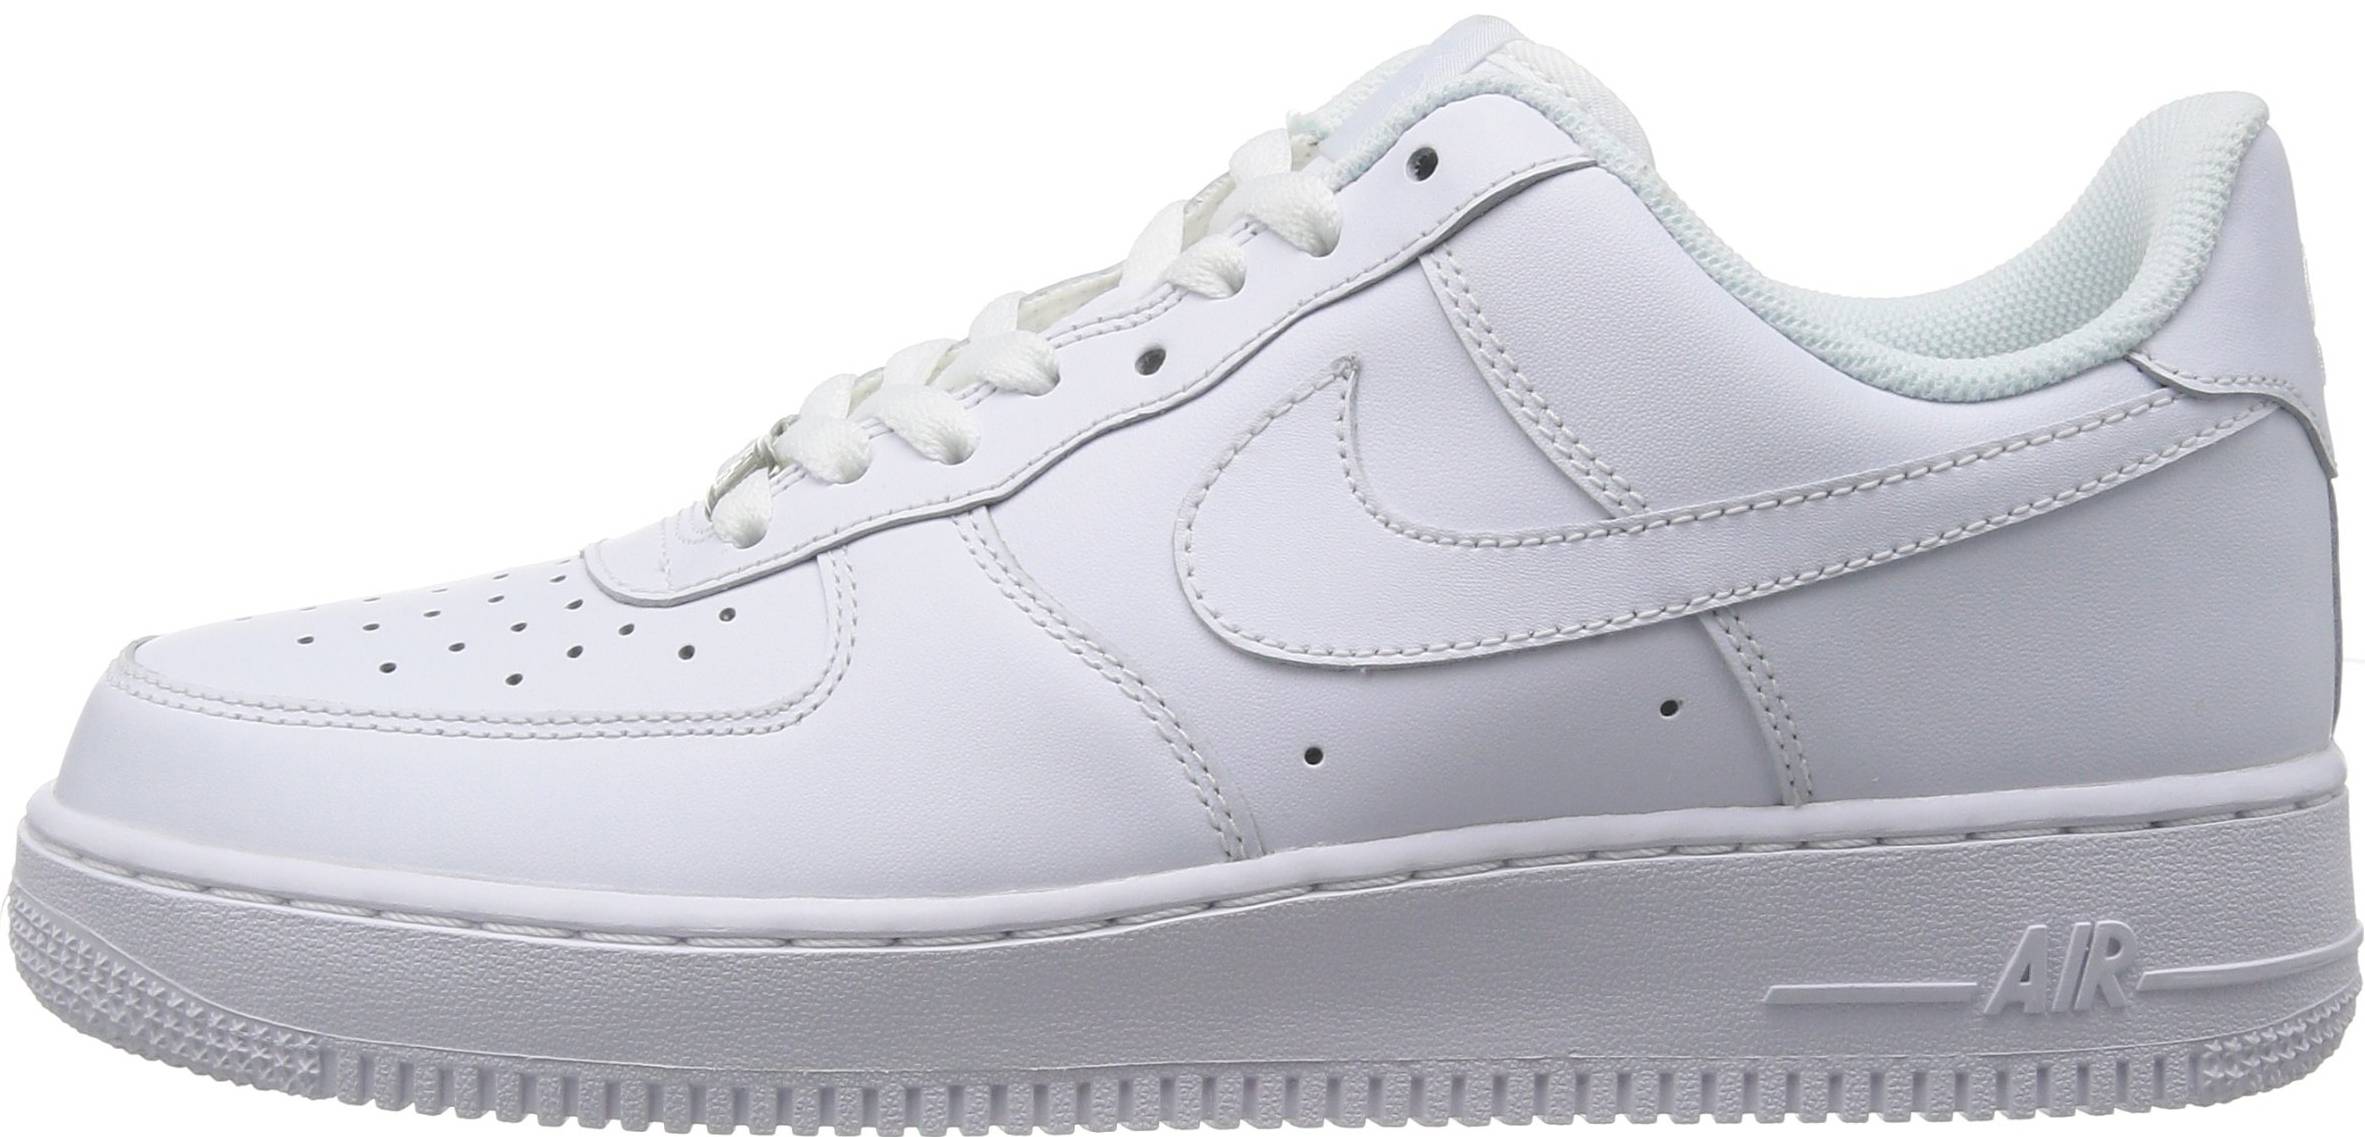 air force 1s new